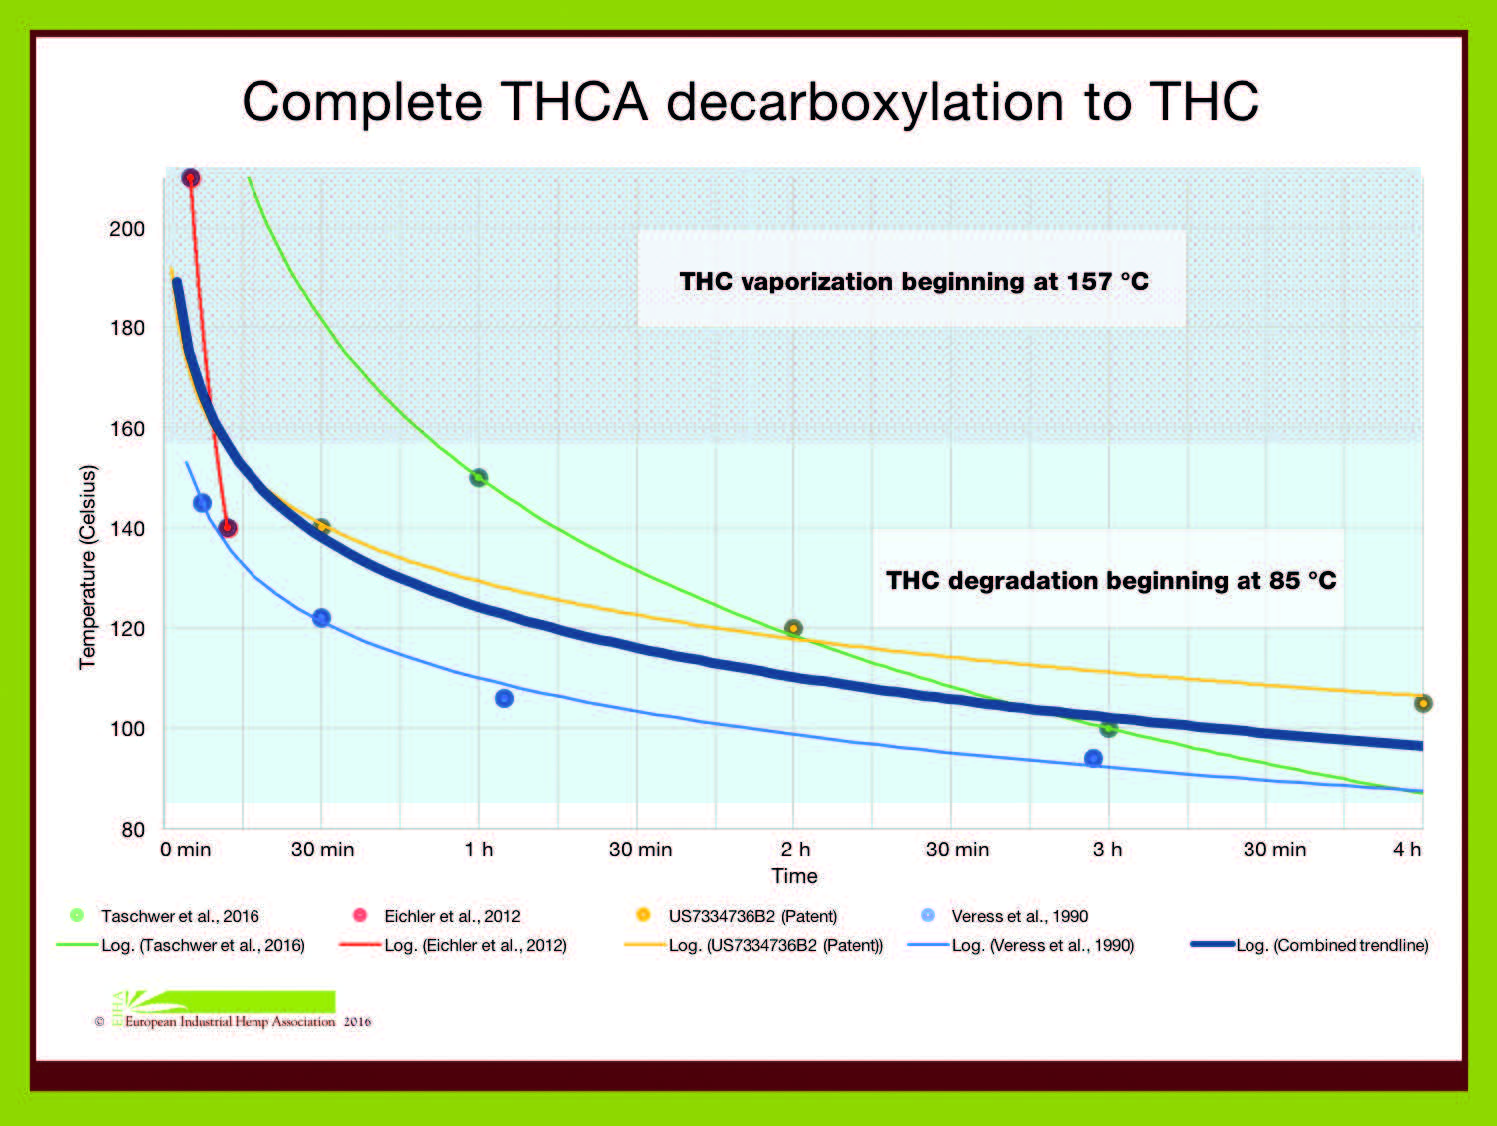 60659_16-10-25-Decarboxylation-of-THCA-to-active-THC.jpg